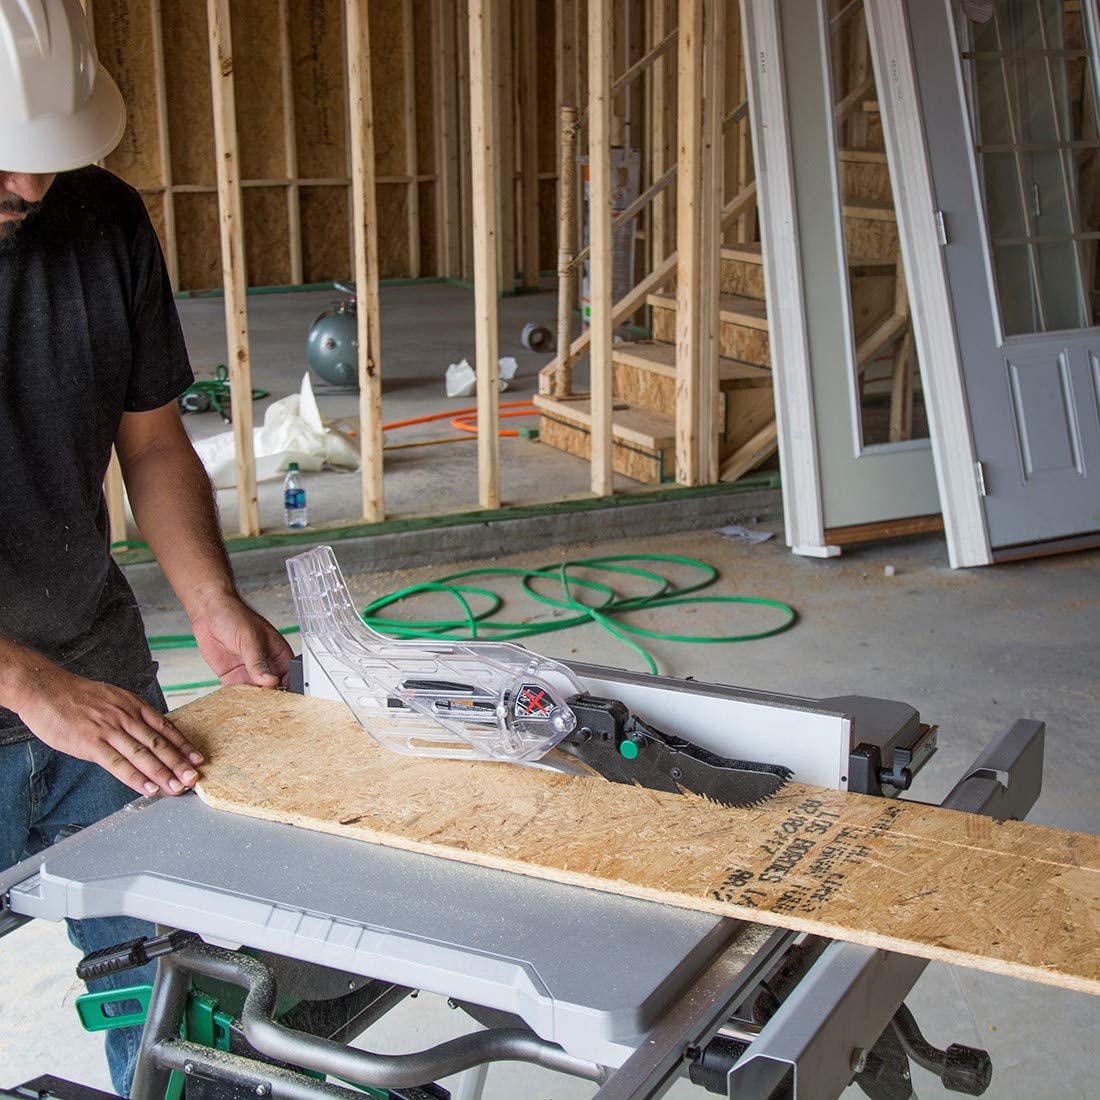 Heavy-duty table saws can handle any materials needed to finish the project.